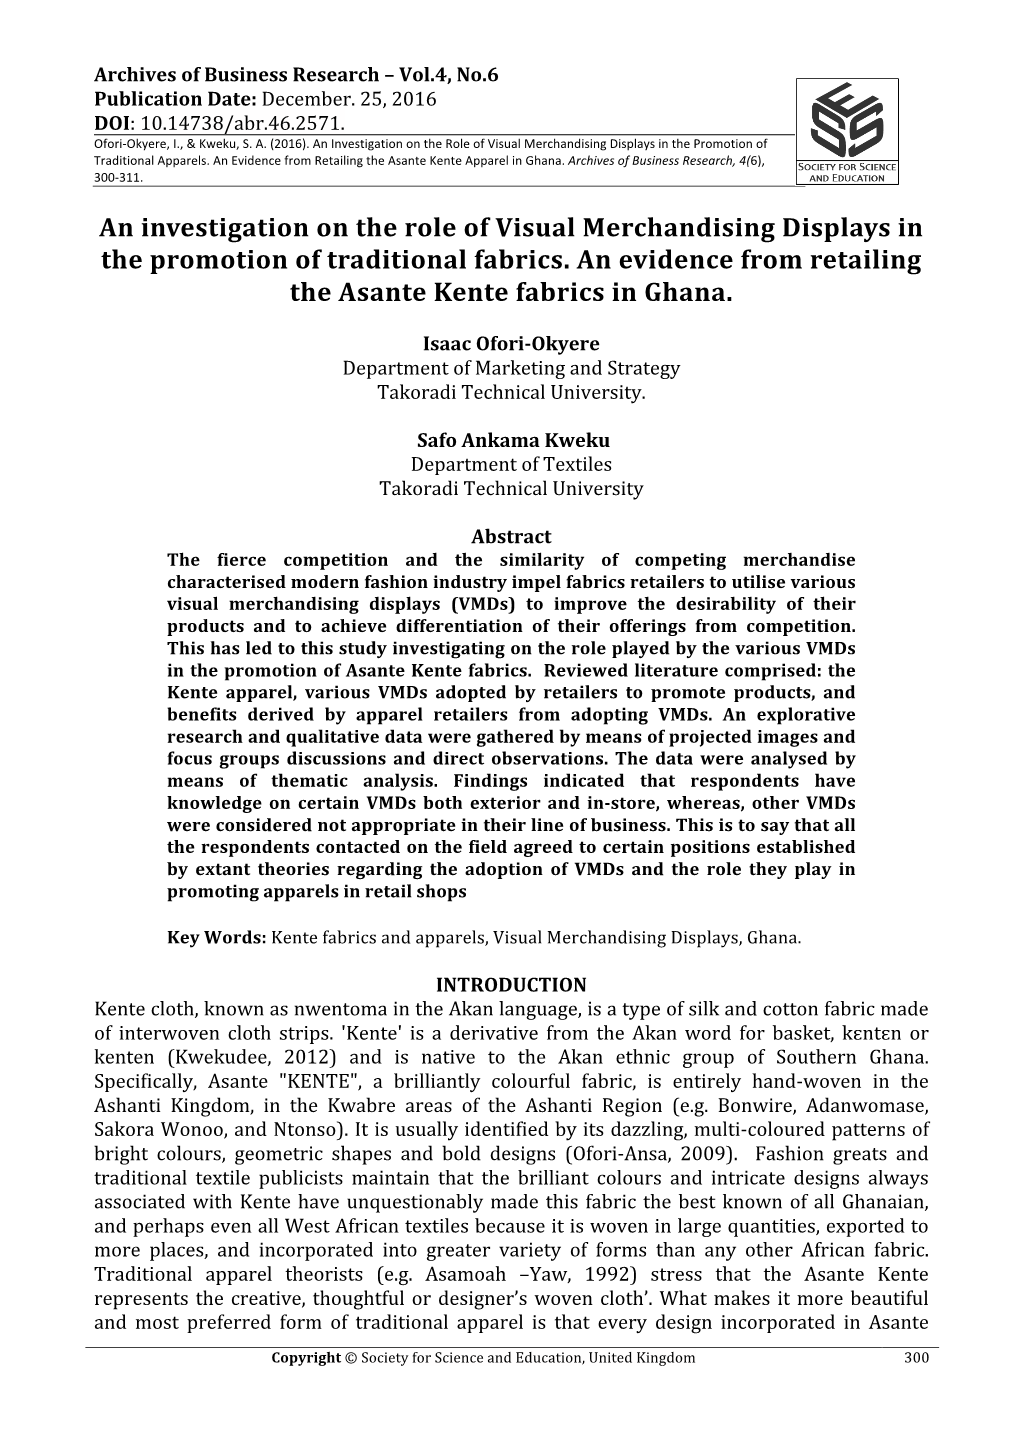 An Investigation on the Role of Visual Merchandising Displays in the Promotion of Traditional Fabrics. an Evidence from Retailing the Asante Kente Fabrics in Ghana